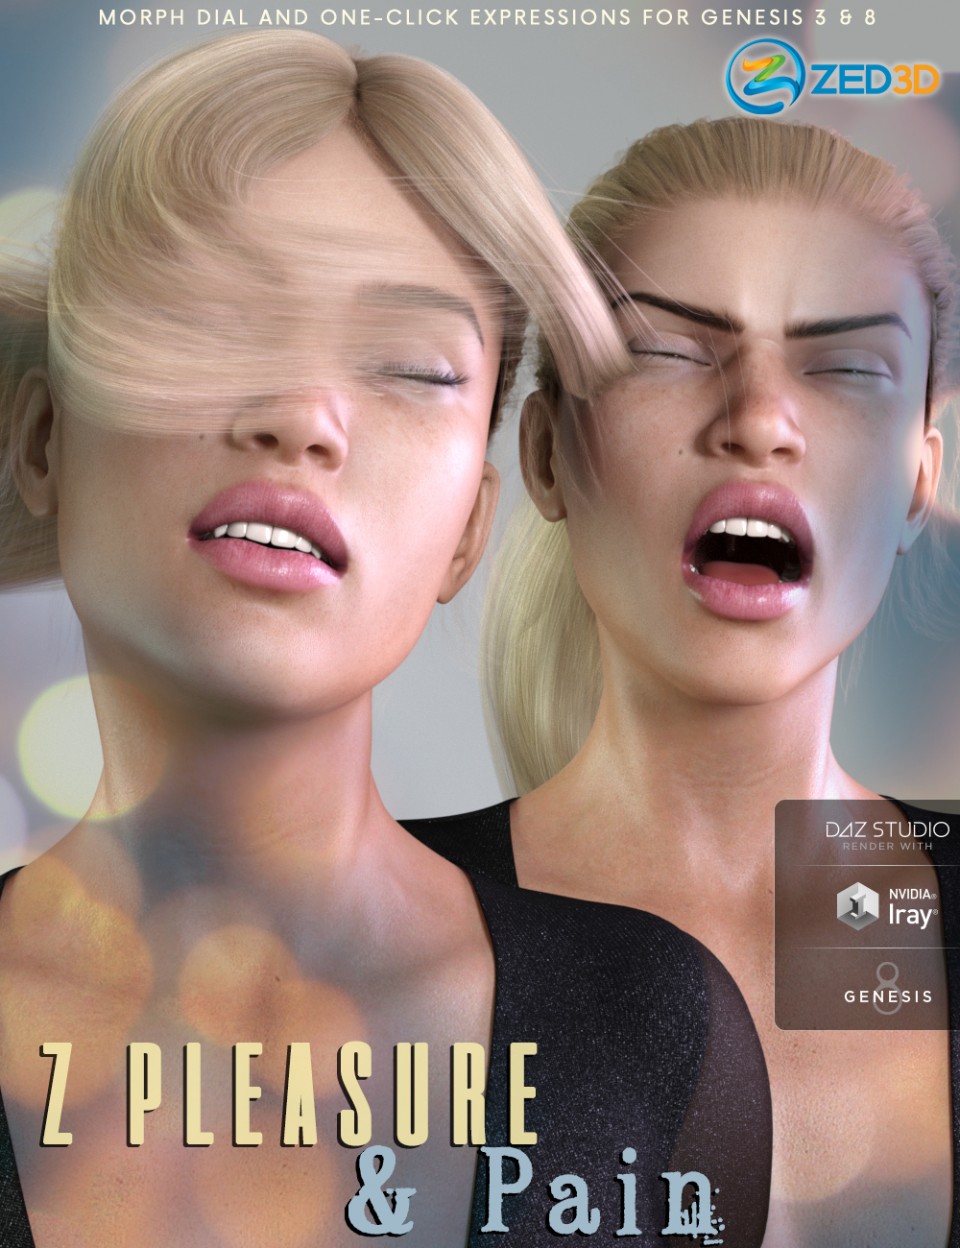 Z Pleasure and Pain – Dialable and One-Click Expressions for Genesis 3 and 8_DAZ3D下载站